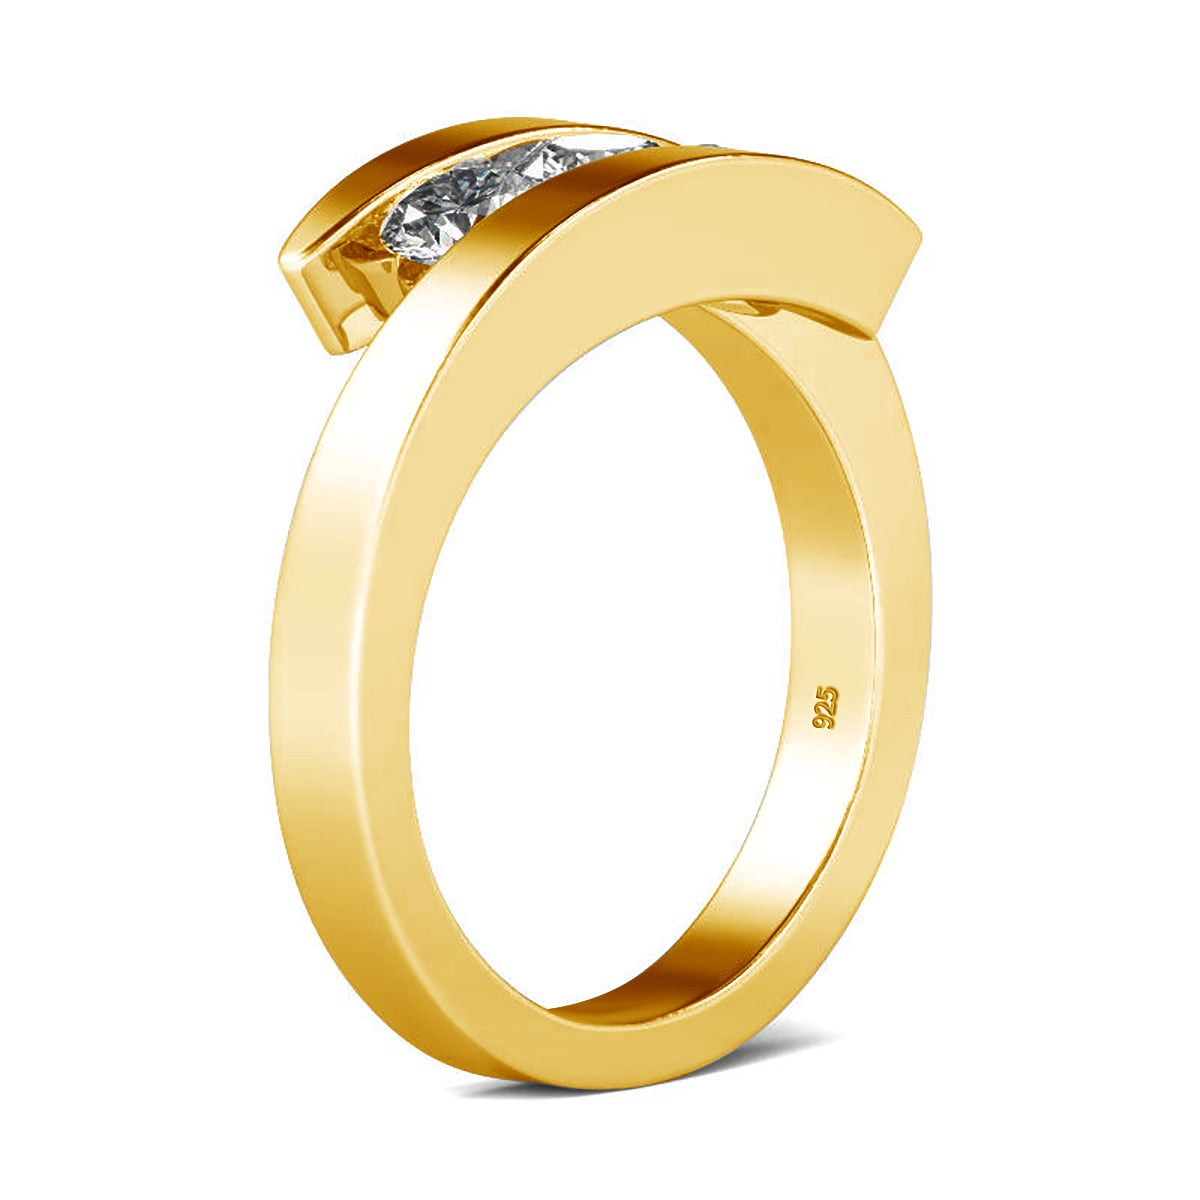 A gold 3 stone bypass ring tension set with three 0.3CT moissanites floating.